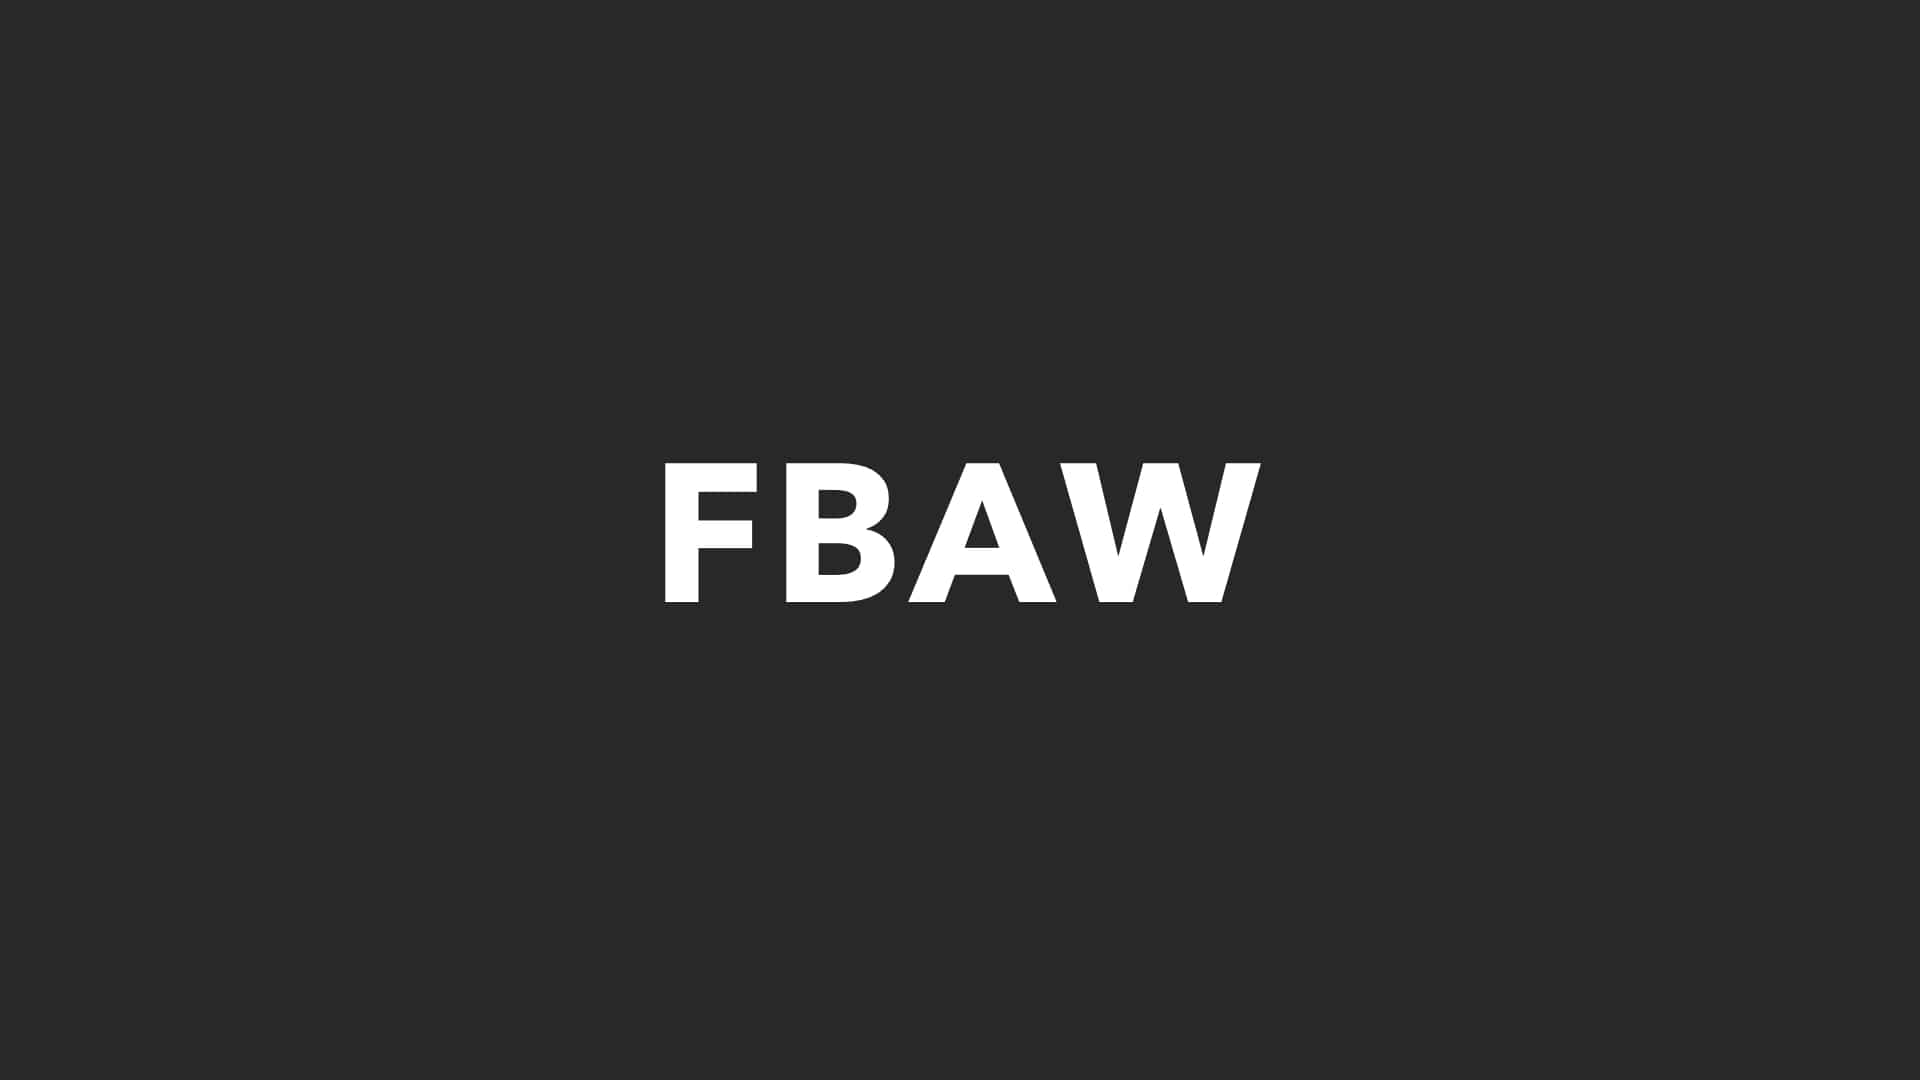 FBAW